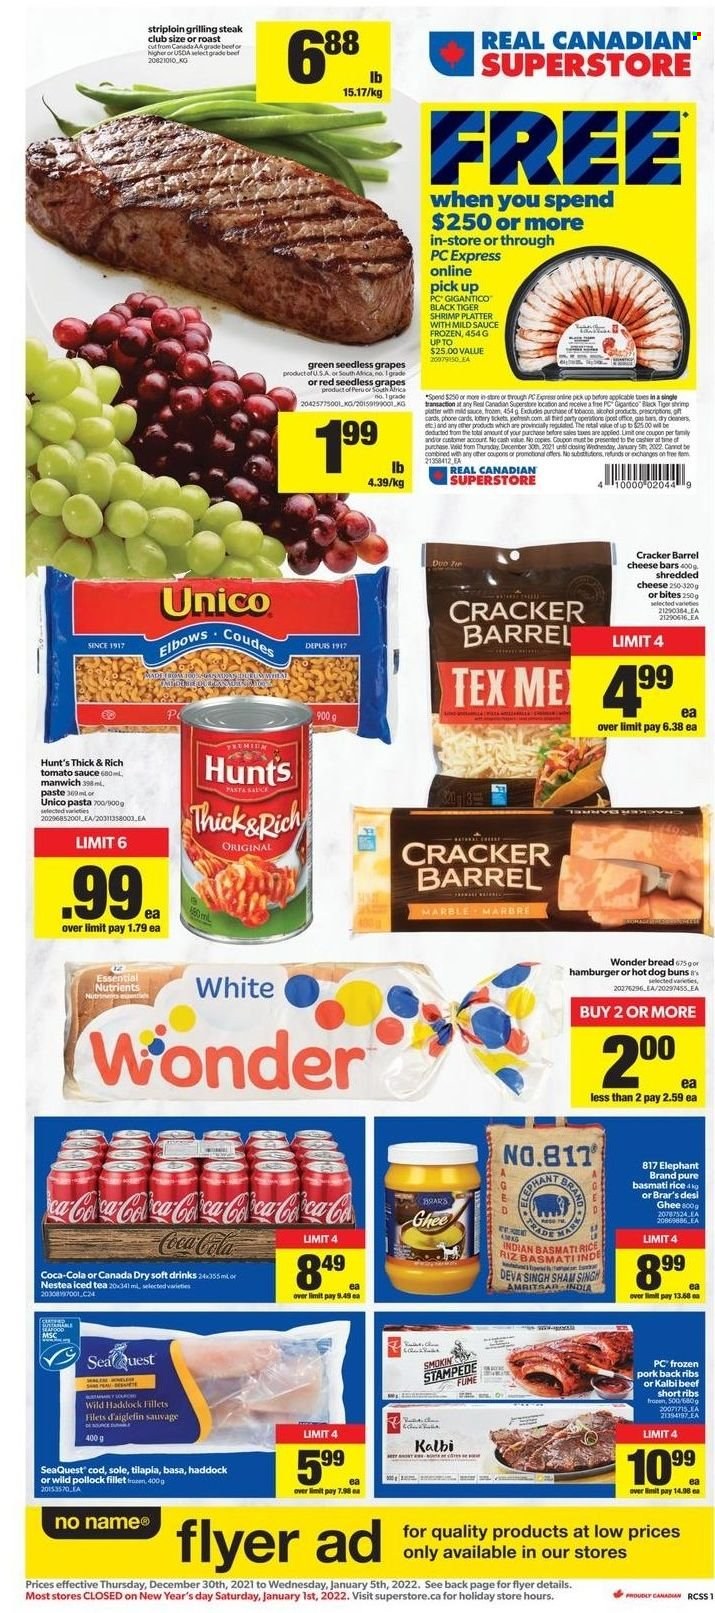 Real Canadian Superstore Flyer - December 30, 2021 - January 05, 2022 - Sales products - bread, buns, grapes, seedless grapes, cod, haddock, pollock, shrimps, No Name, pasta, sauce, shredded cheese, ghee, crackers, Manwich, Canada Dry, Coca-Cola, ice tea, soft drink, beef ribs, pork meat, pork ribs, pork back ribs, platter, steak. Page 1.